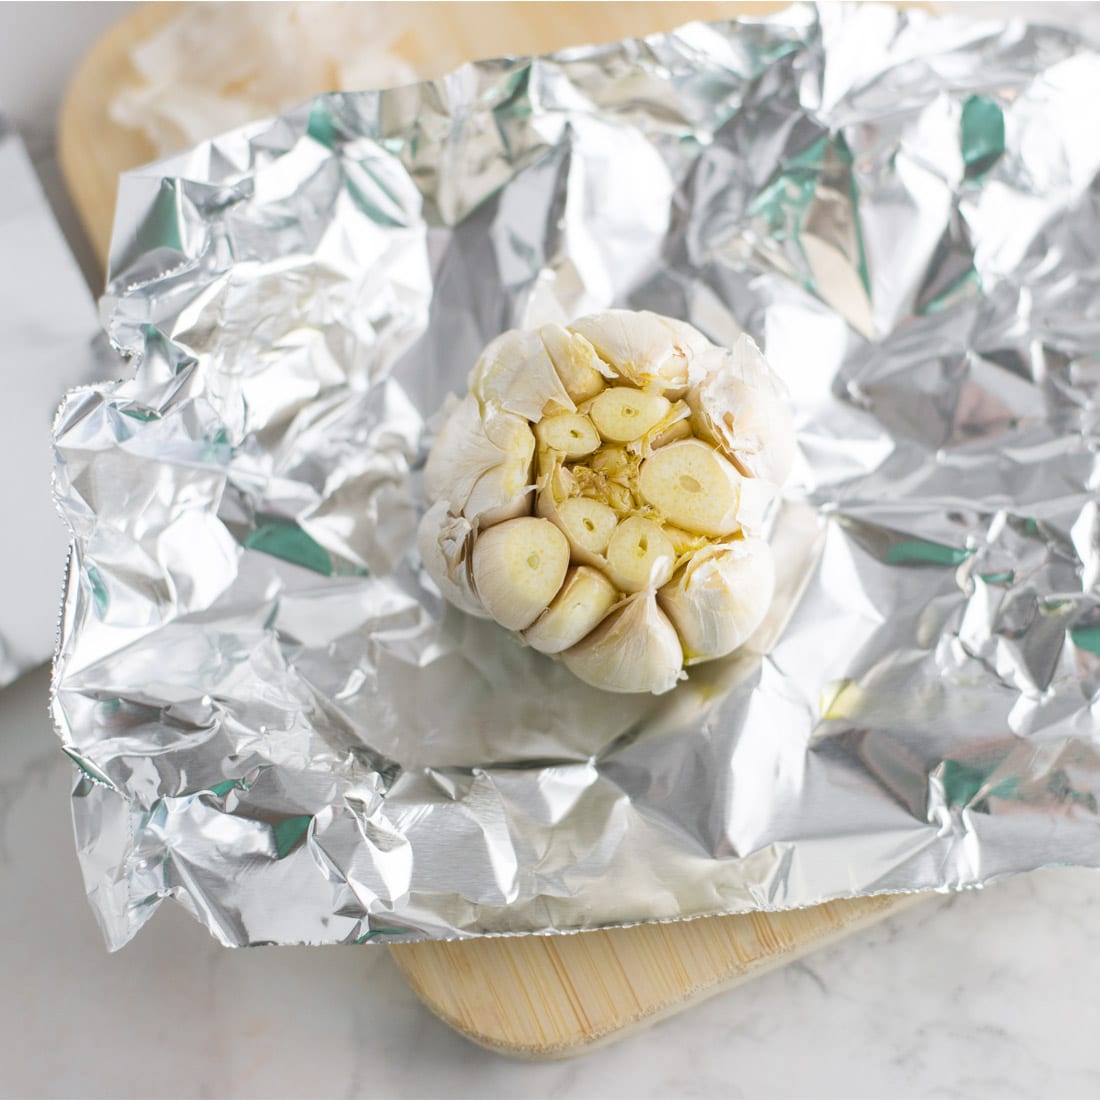 garlic bulb with olive oil on sheet of aluminum foil